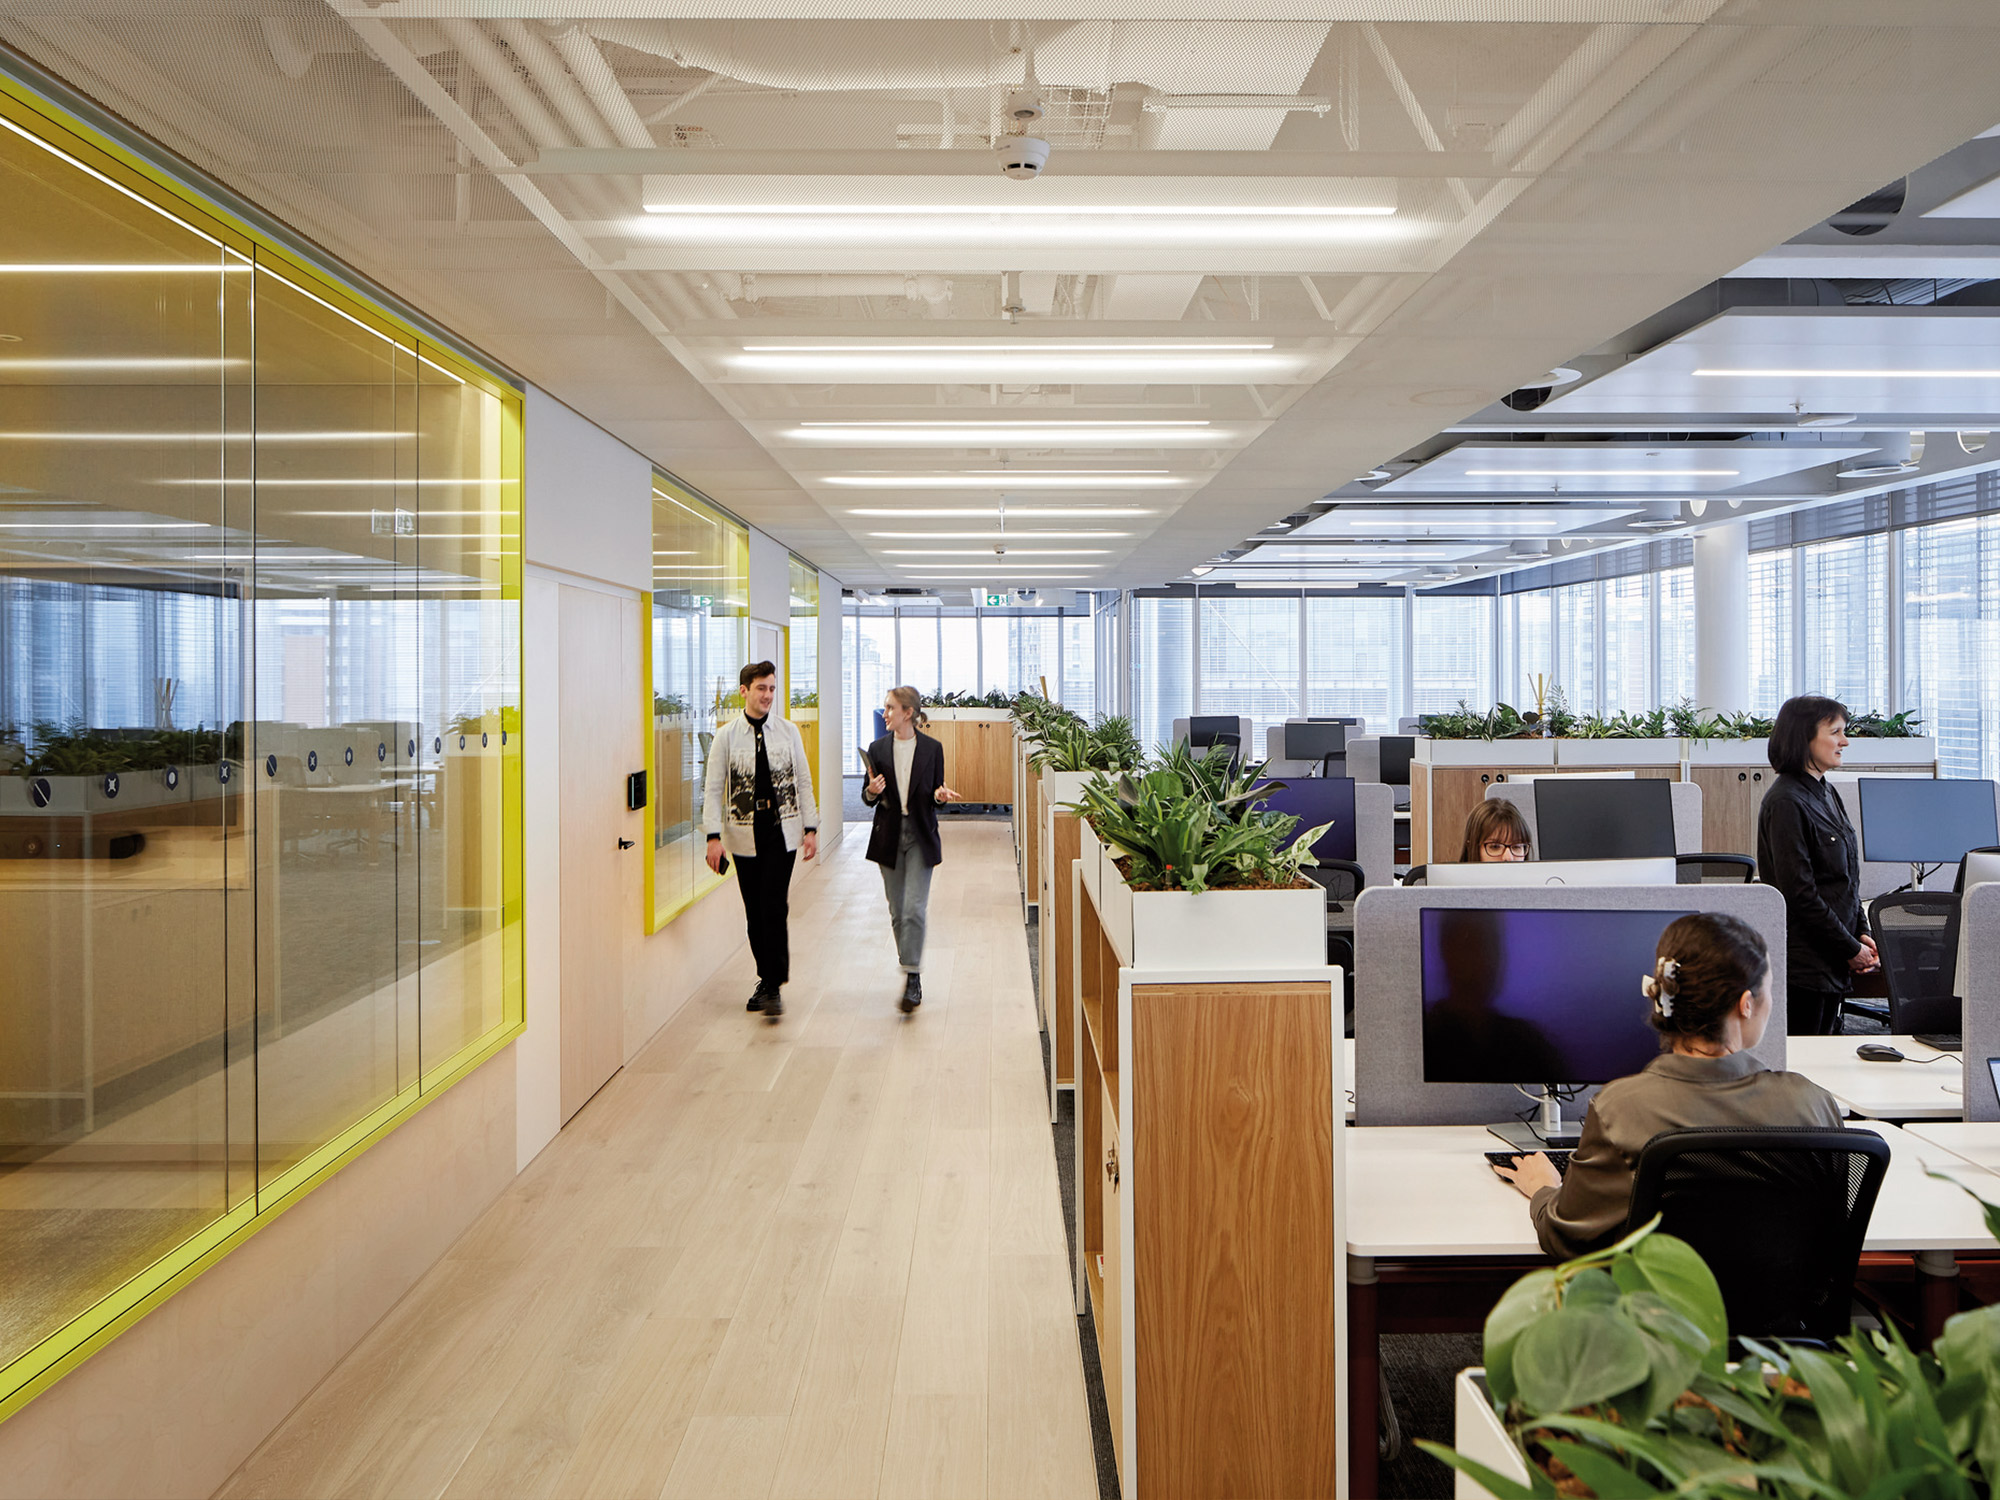 Modern office space bustling with activity, featuring employees engaged in various tasks, with an interior design that incorporates glass partitions, wooden floors, and ample lighting.